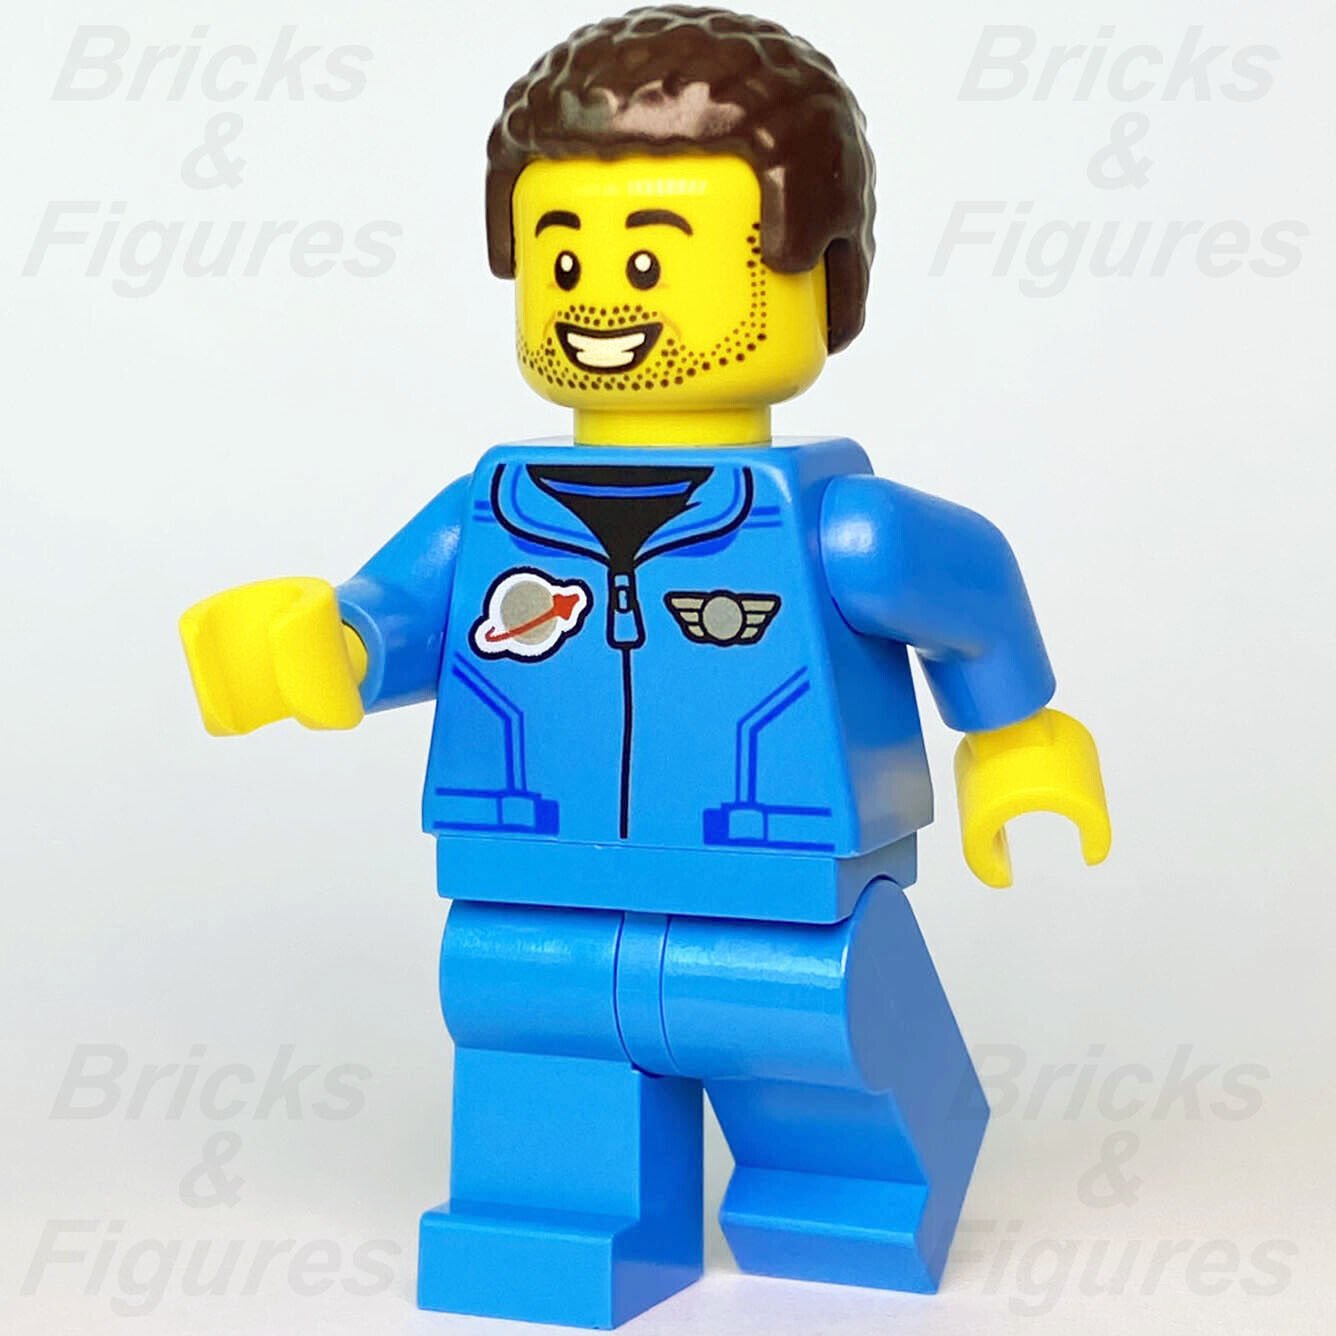 Town LEGO Lunar Research Astronaut Male Space Port Minifigure 60350 cty1412 New - Bricks & Figures